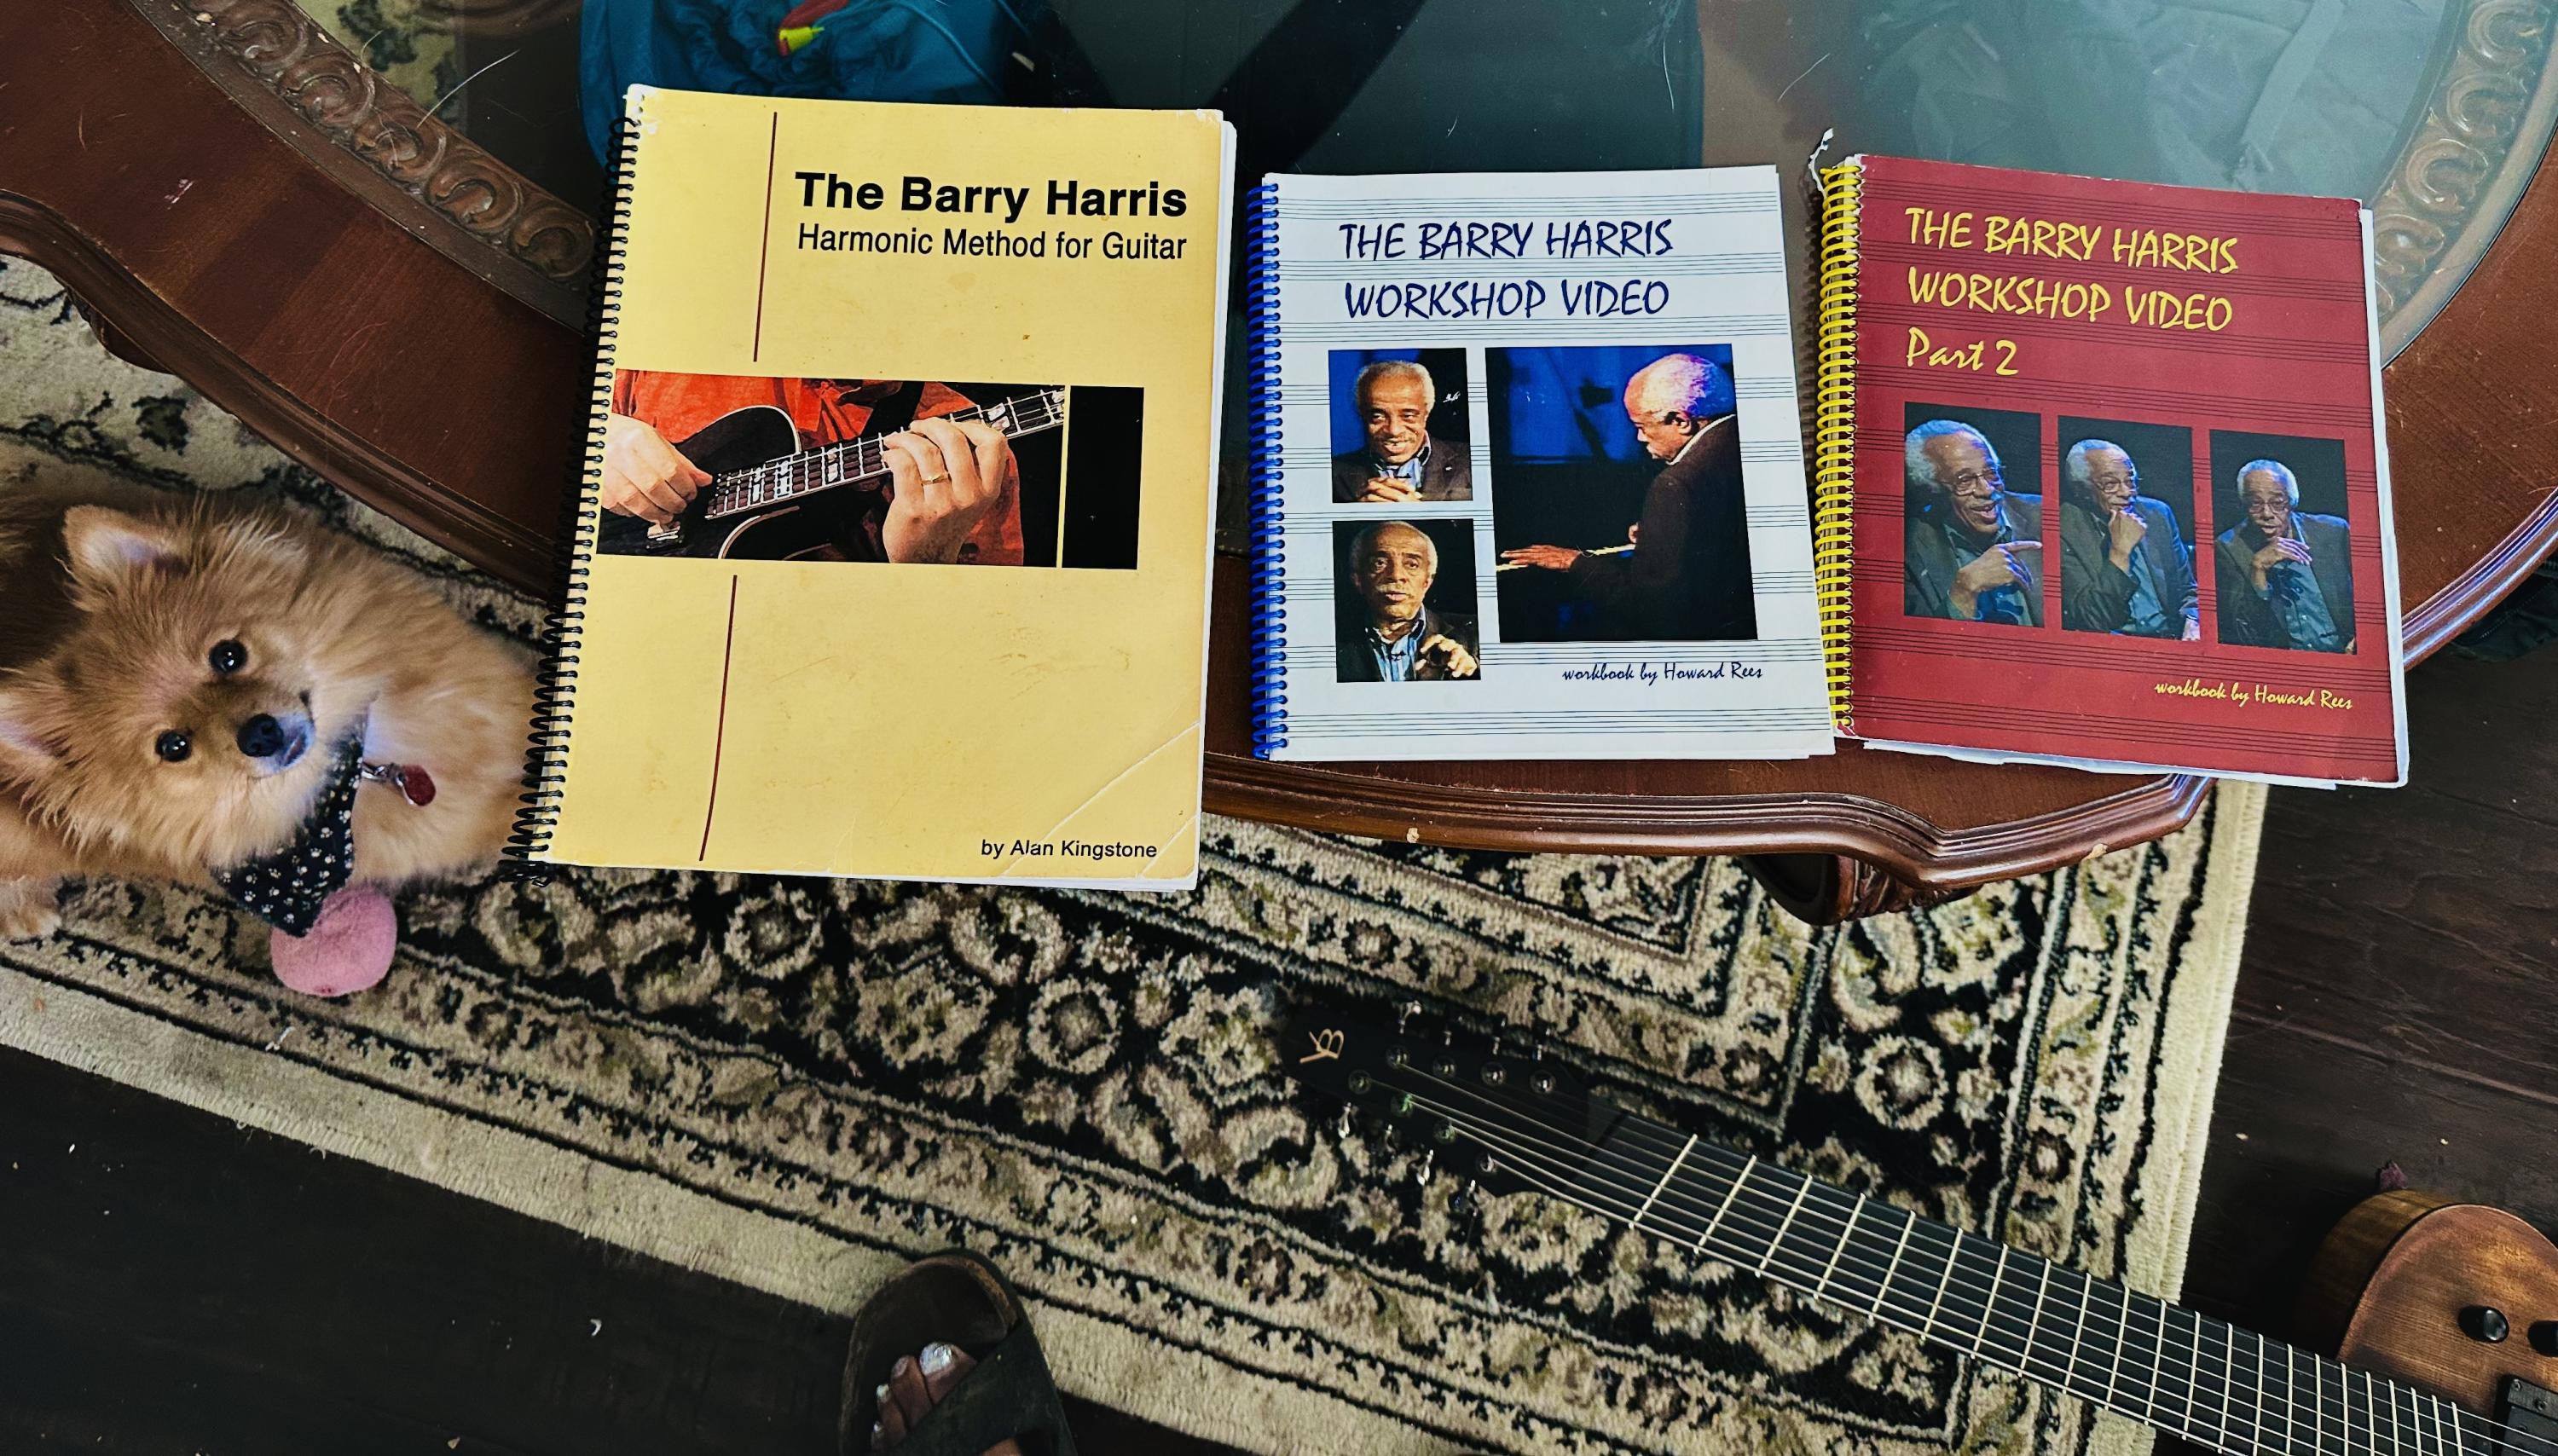 Request for a Barry Harris Pre-Quel on Music Theory-9a51608a-e5c9-443d-a840-94bbc03852c5-jpg